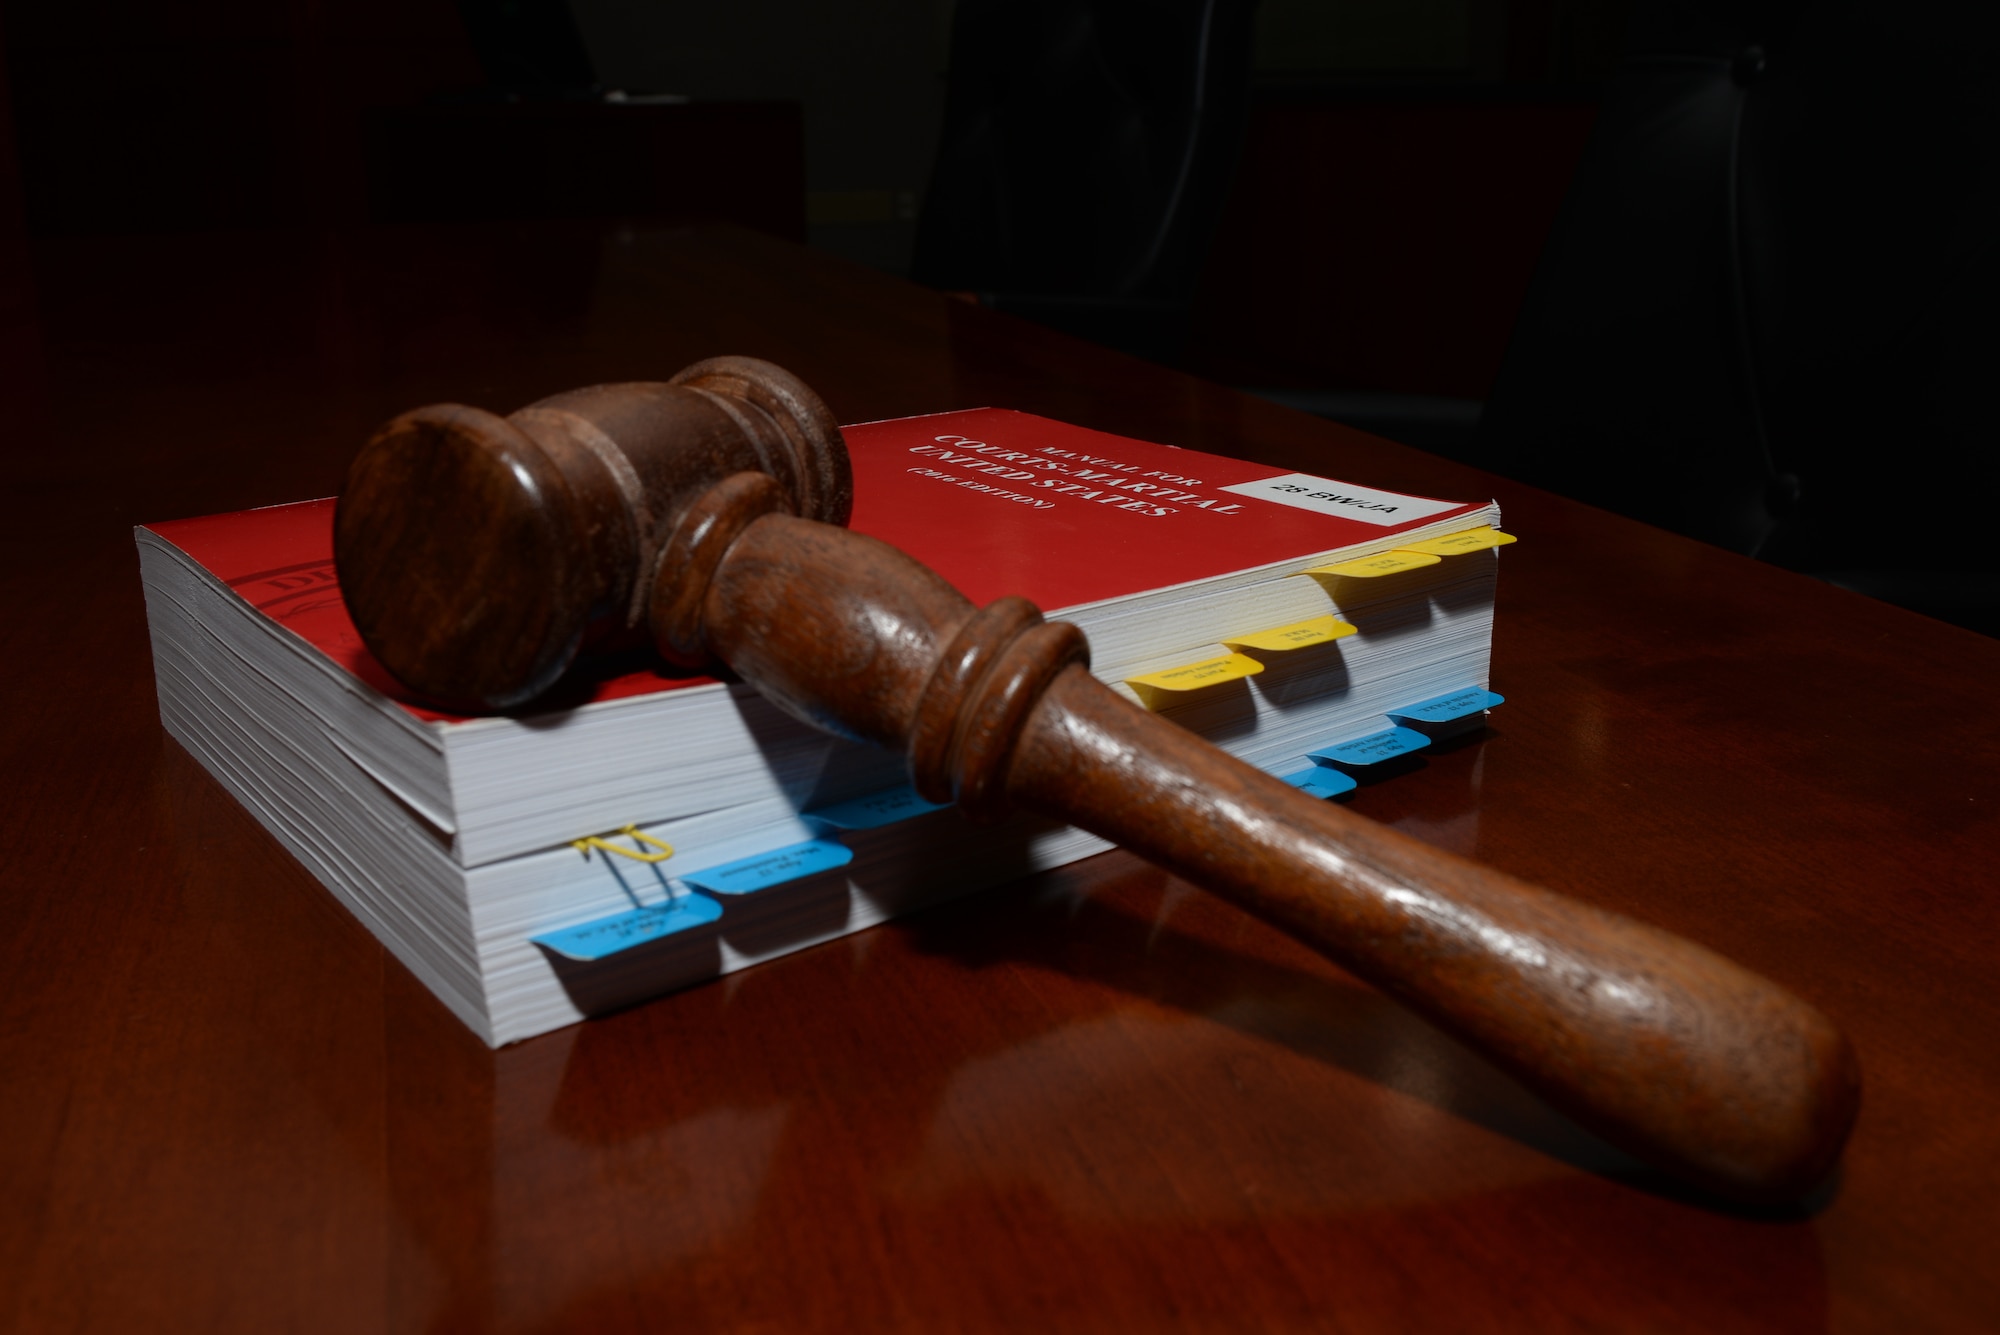 A gavel lays on the Uniform Code of Military Justice inside the 28th Bomb Wing courtroom at Ellsworth Air Force Base, S.D., July 17, 2018. The UCMJ is the primary legal code that governs all internal military justice matters. (U.S. Air Force photo by Airman 1st Class Nicolas Z. Erwin)